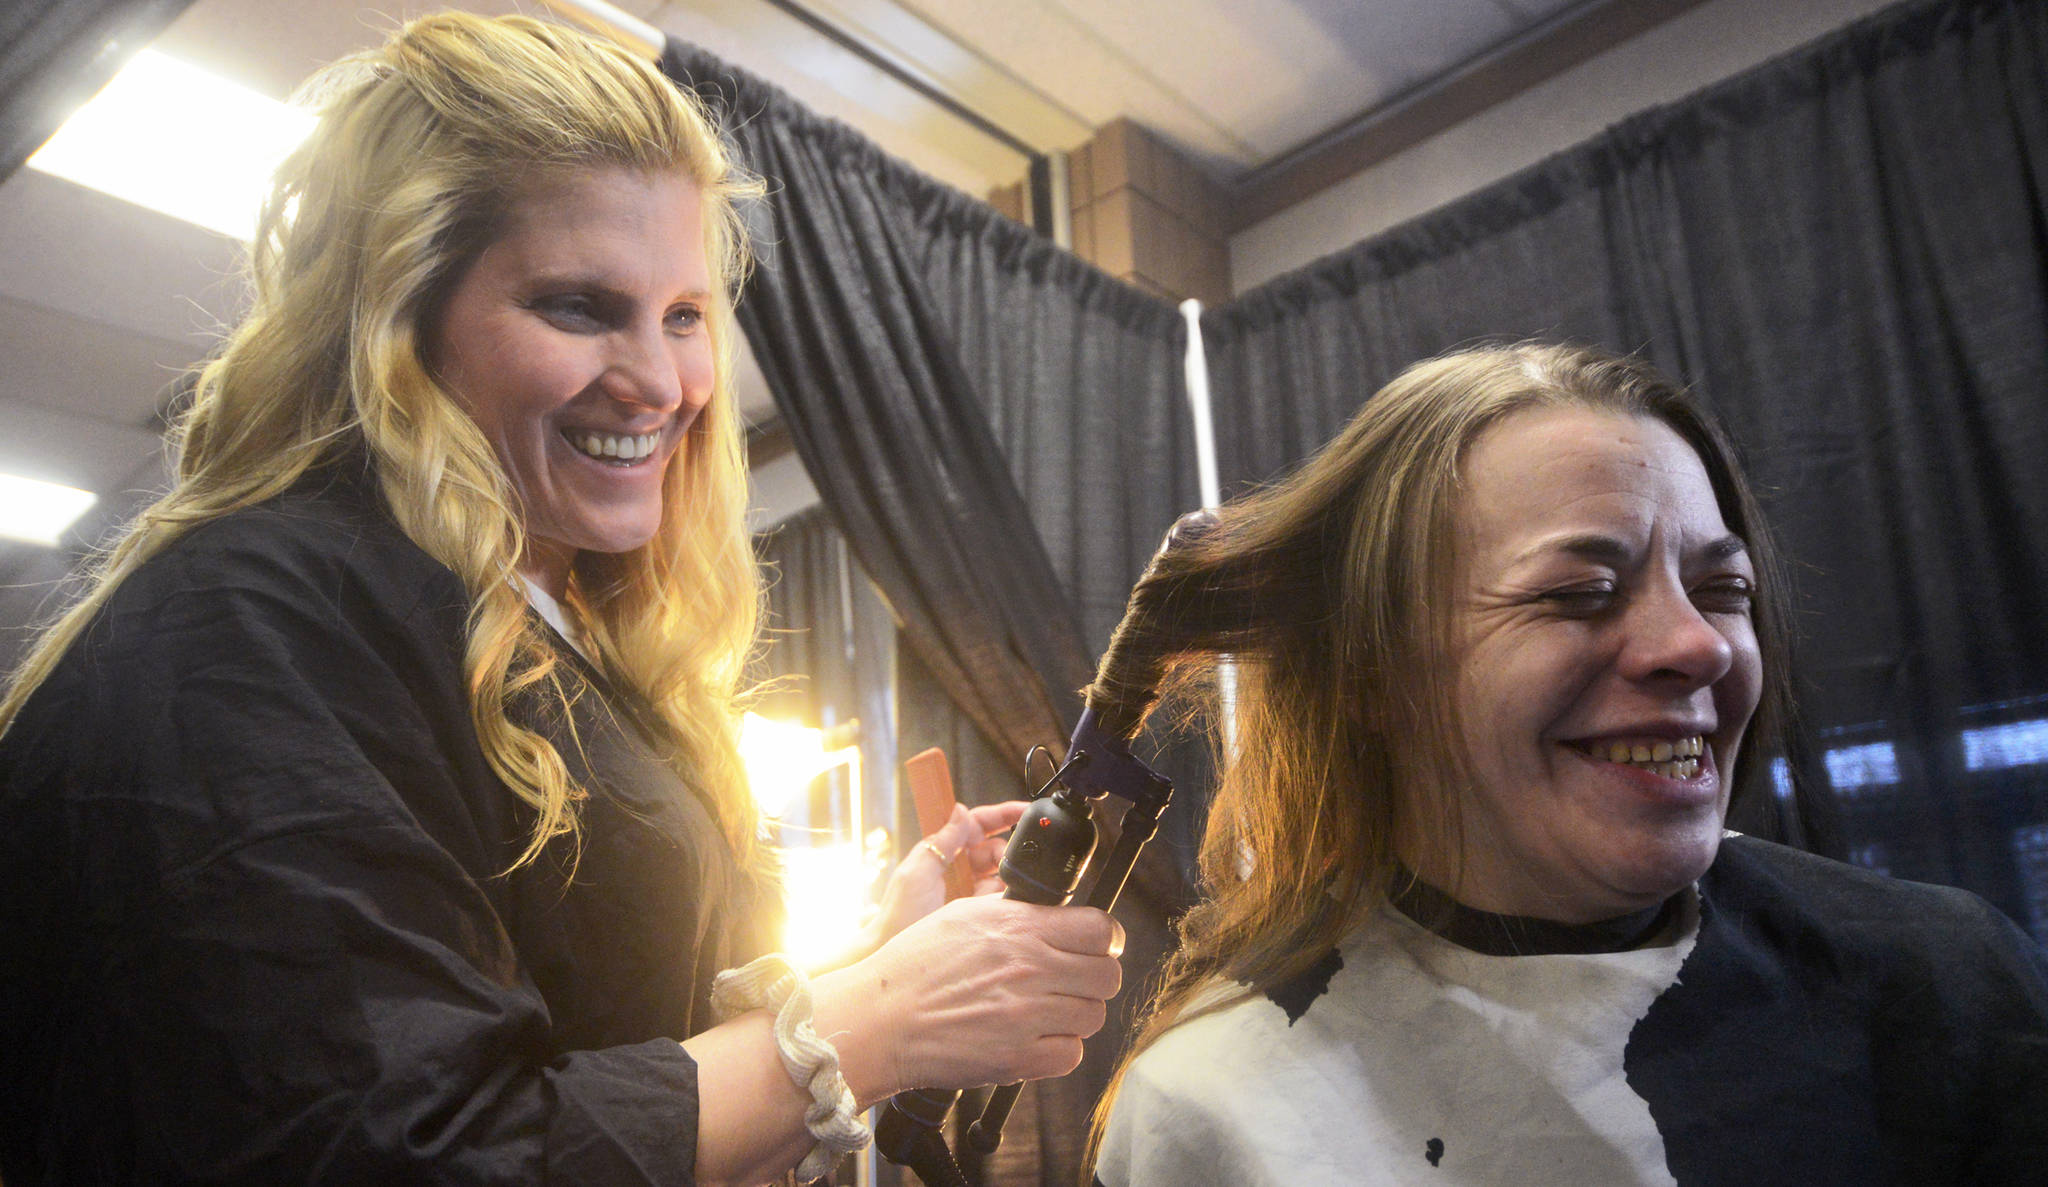 In this 2016 file photo, volunteer hairdresser Joy Conner (left) curls the hair of Alison Alley during Project Homeless Connect, an event at which local individuals and organizations provided information and services to the Kenai Peninsula community members experiencing homelessness. This year’s event will once again provide haircuts, massages, food, and veterinary care on Jan. 24 at the Soldotna Regional Sports Complex. (Photo by Ben Boettger/Peninsula Clarion)